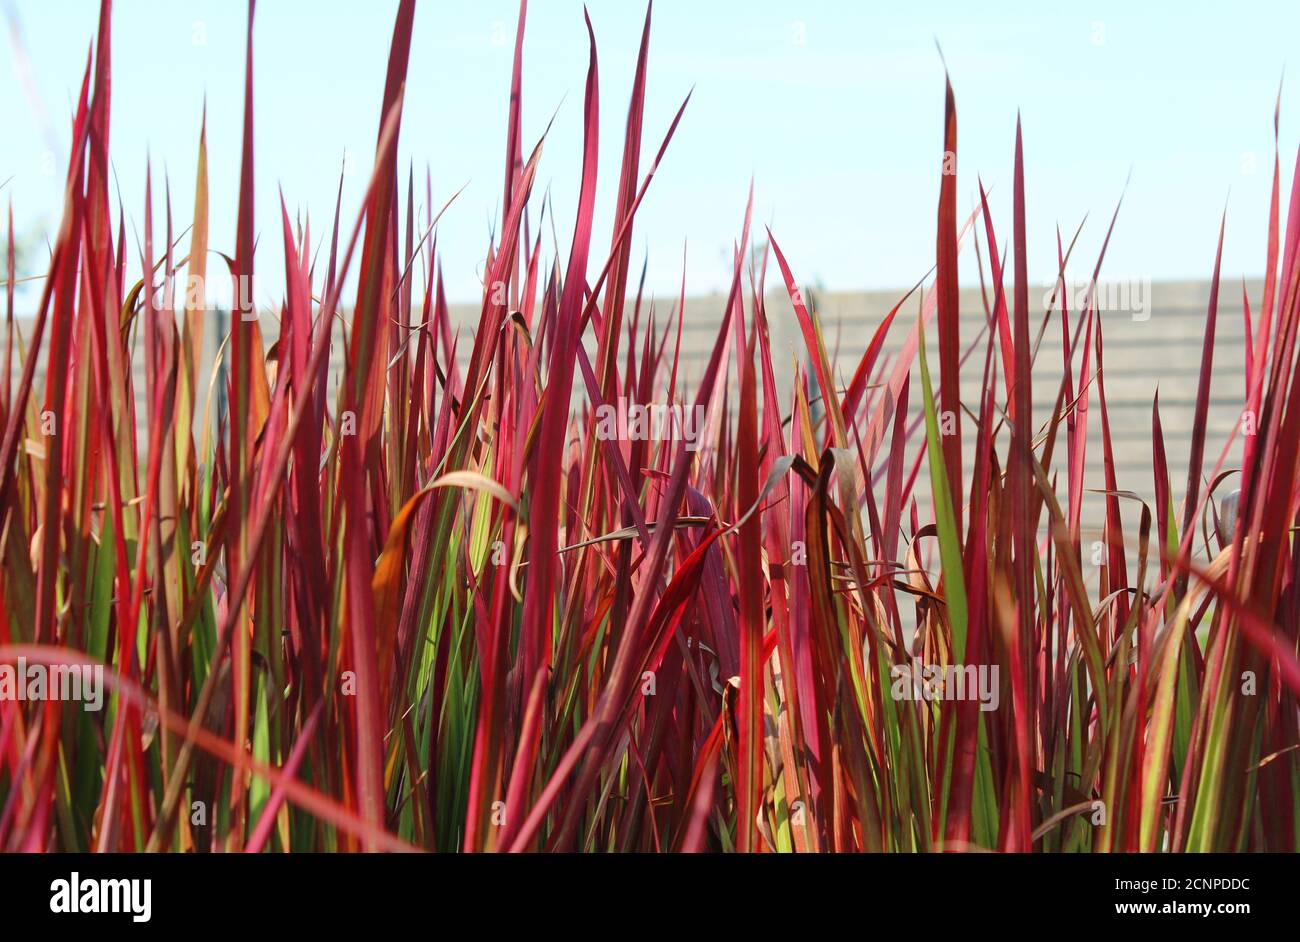 The bright red ornamental grass Imperata cylindrica 'Red Baron', also known as Japanese Blood Grass, growing in a natural outdoor setting. Selective f Stock Photo